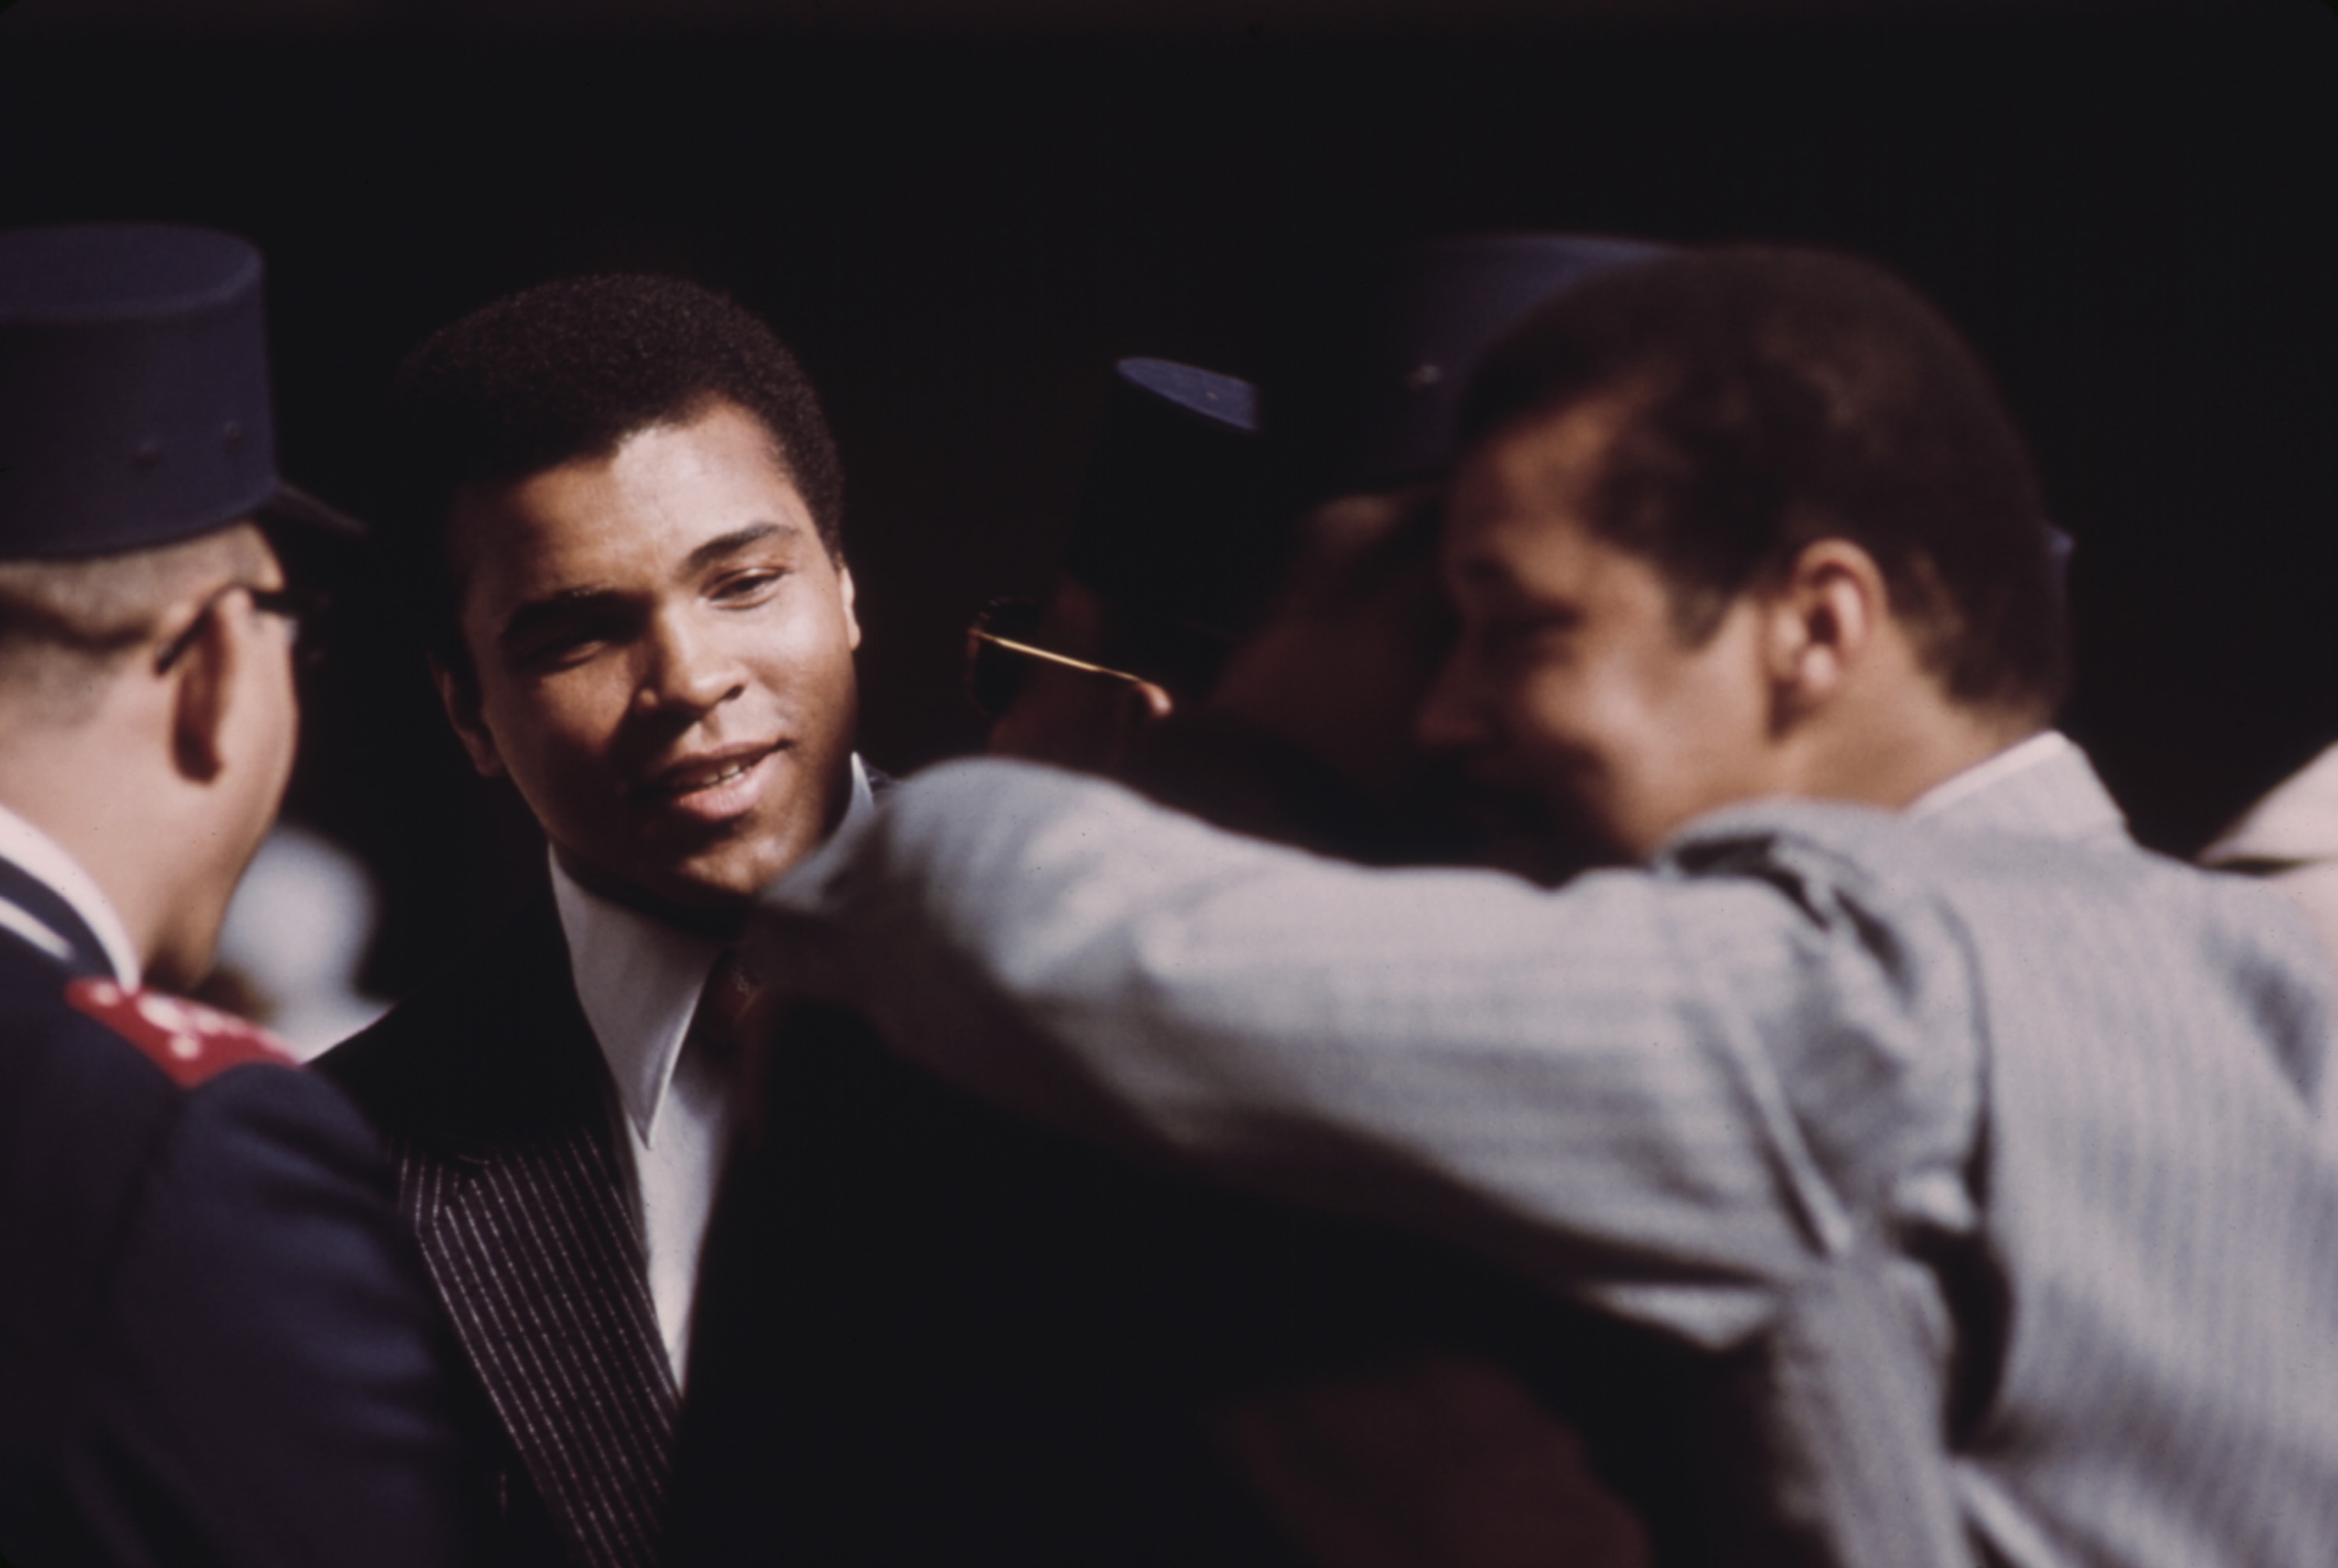 Muhammad Ali talks with fellow Black Muslims in Chicago March 1974., Image: 127530994, License: Rights-managed, Restrictions: For usage credit please use;, Model Release: no, Credit line: Profimedia, Everett